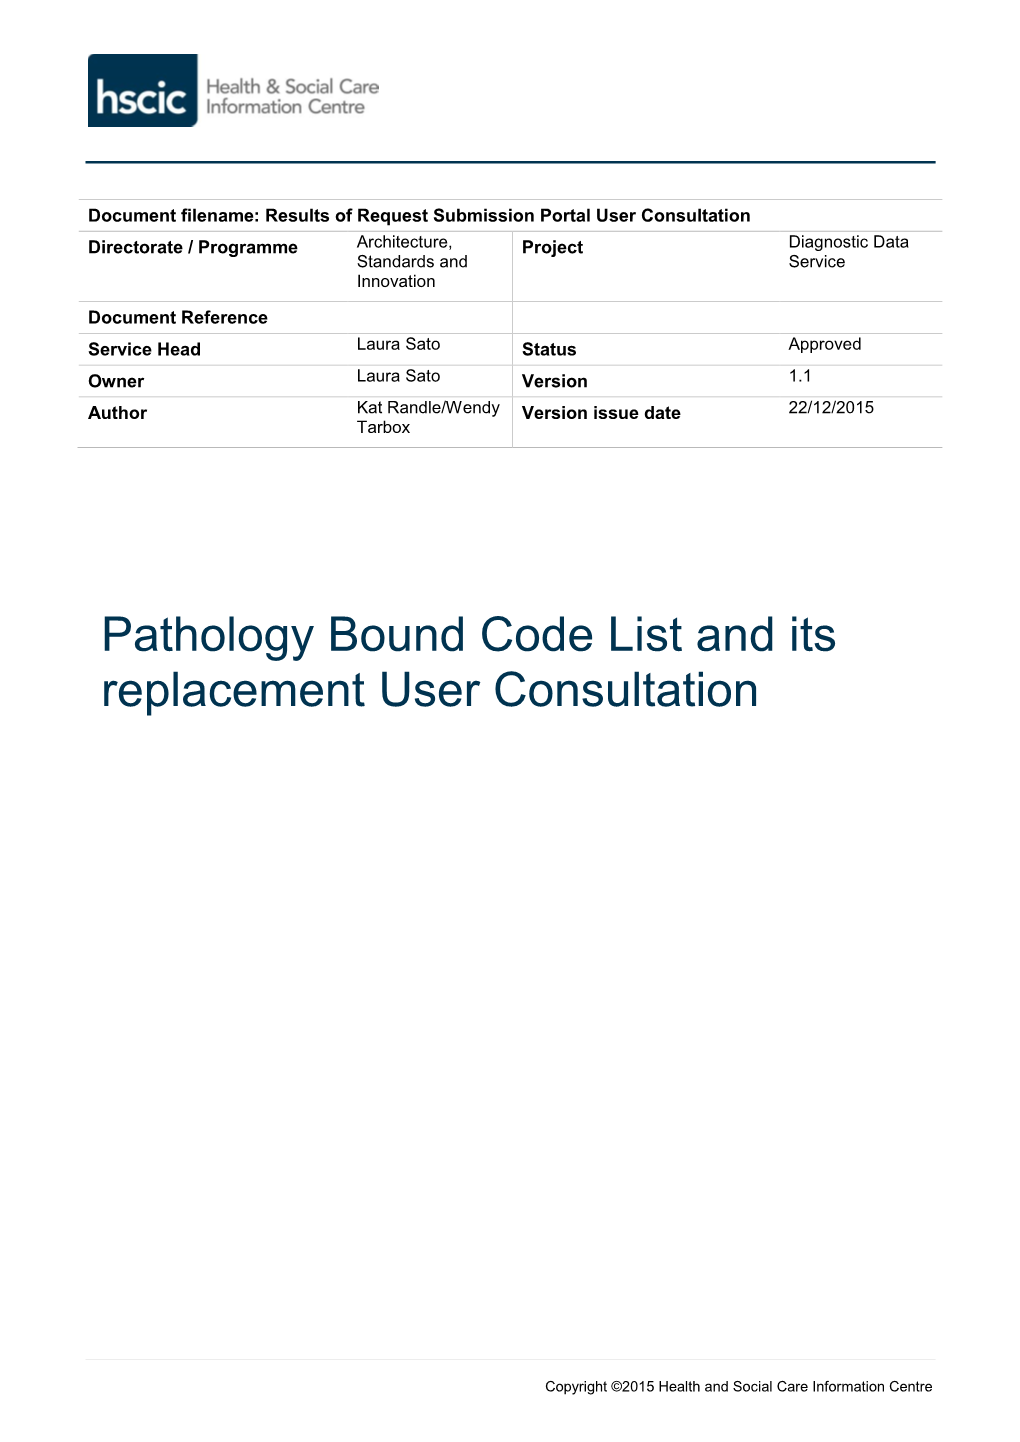 Pathology Bound Code List and Its Replacement User Consultation V1.1 22/12/2015